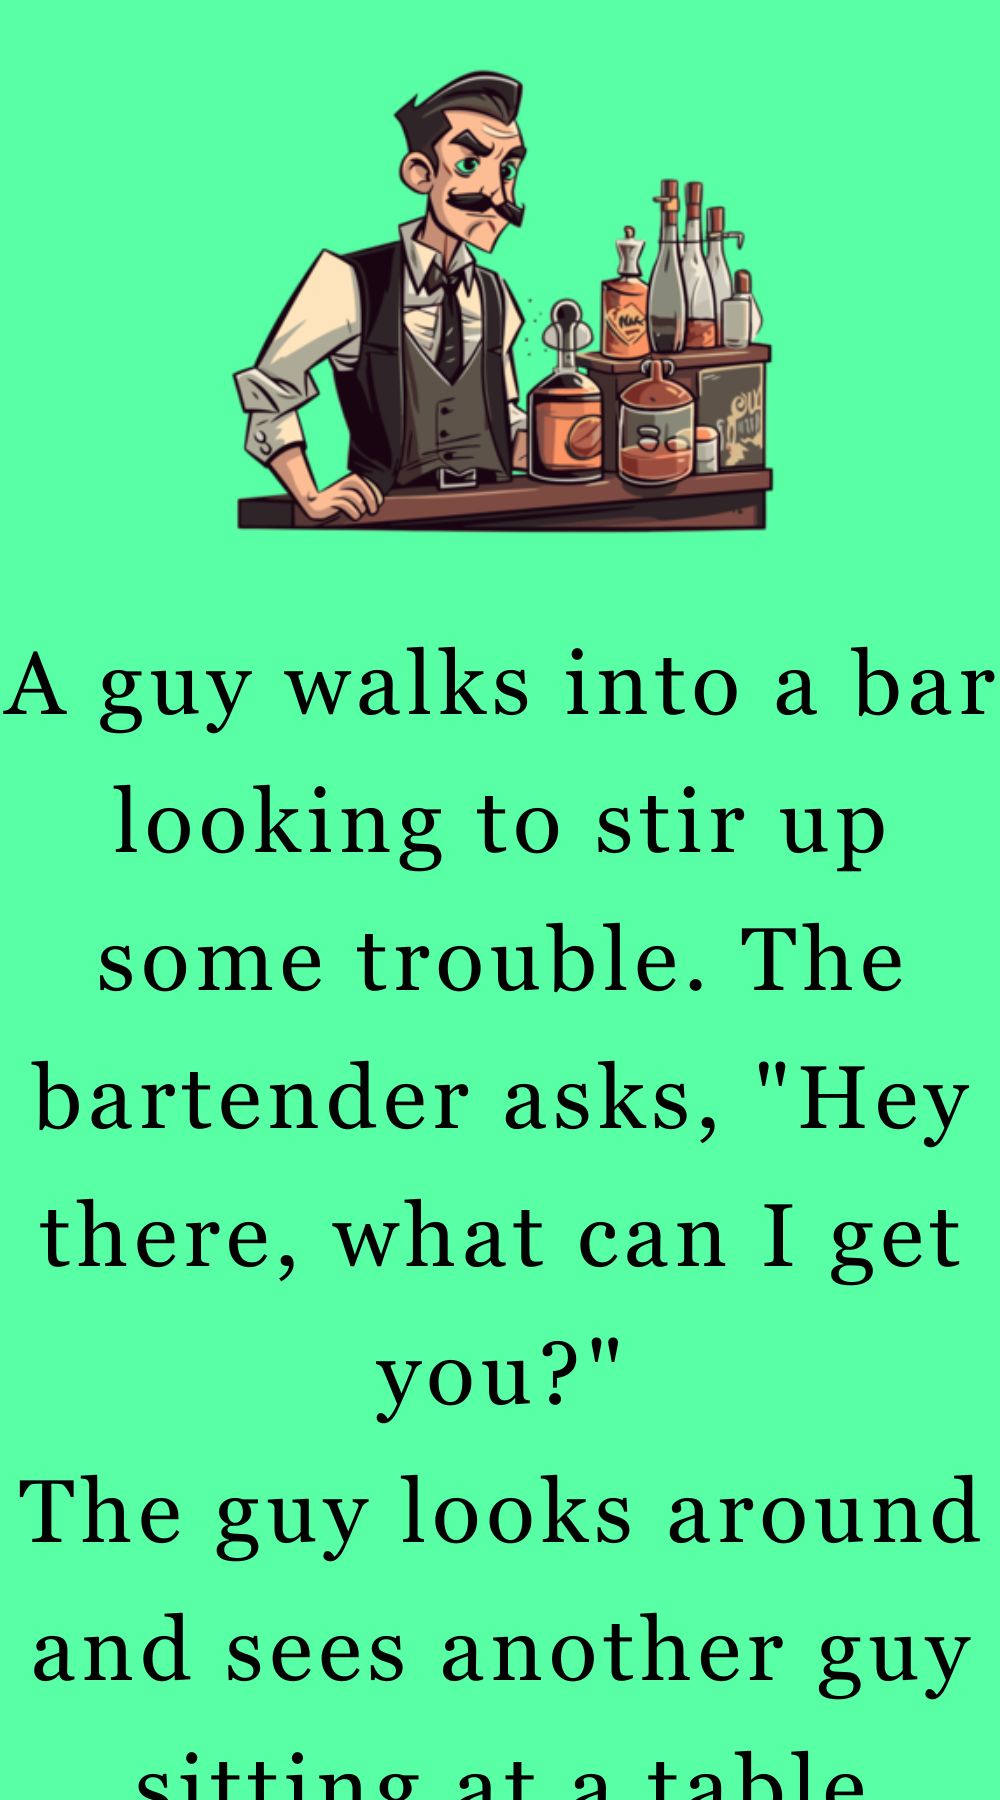 A guy walks into a bar looking to stir up